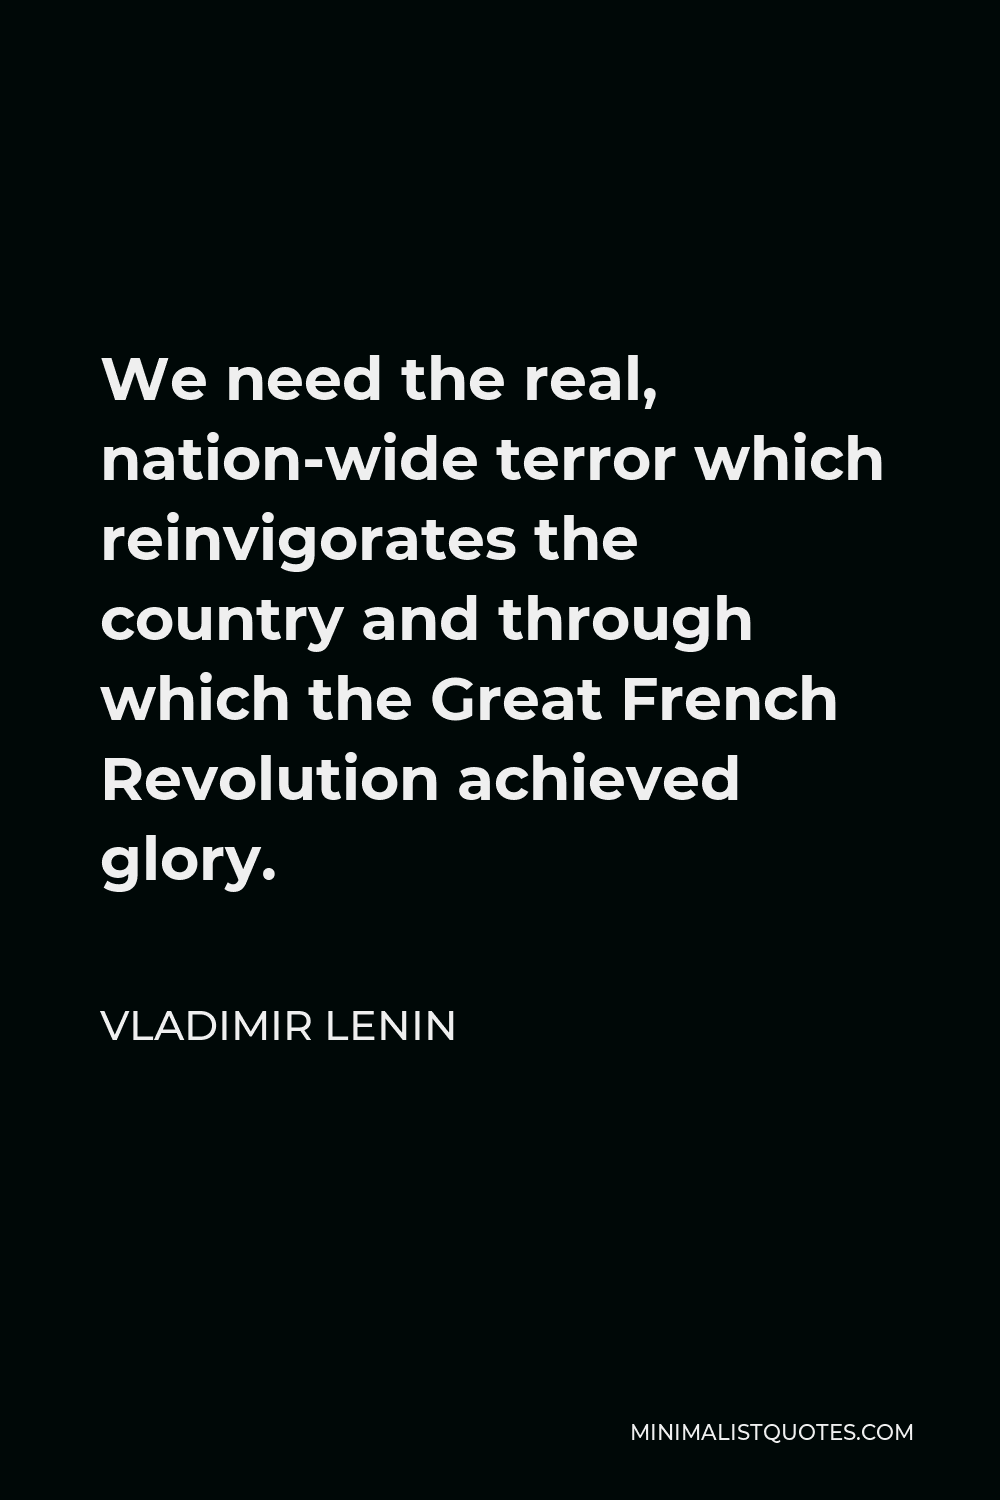 Vladimir Lenin Quote - We need the real, nation-wide terror which reinvigorates the country and through which the Great French Revolution achieved glory.